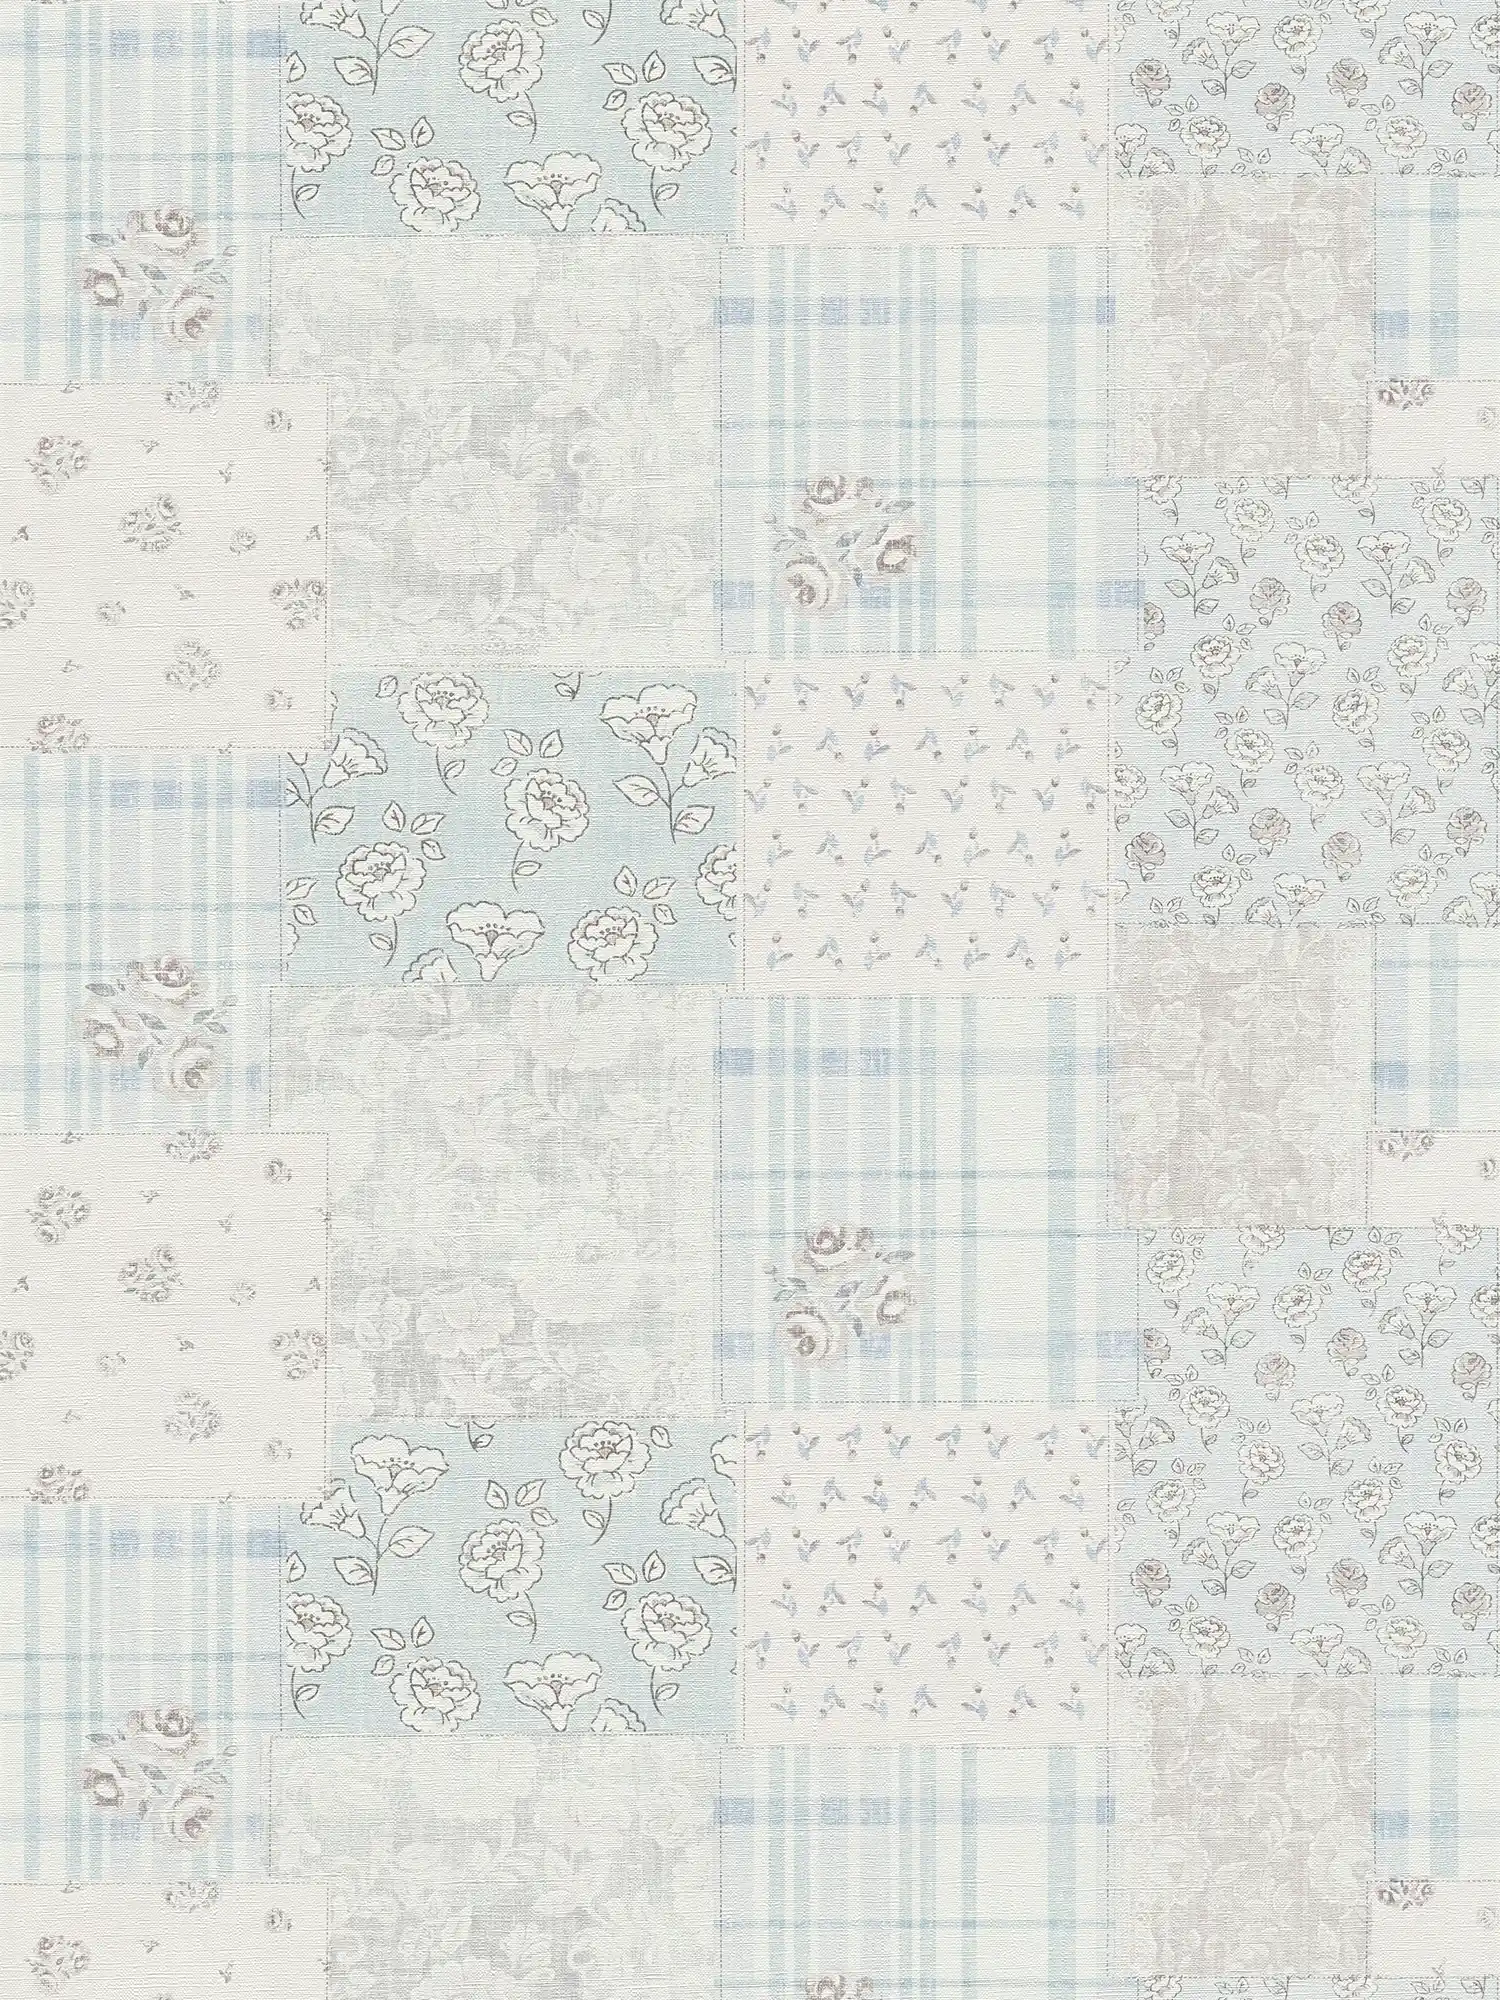 Non-woven wallpaper floral pattern and checkered country style - light blue, grey, white
